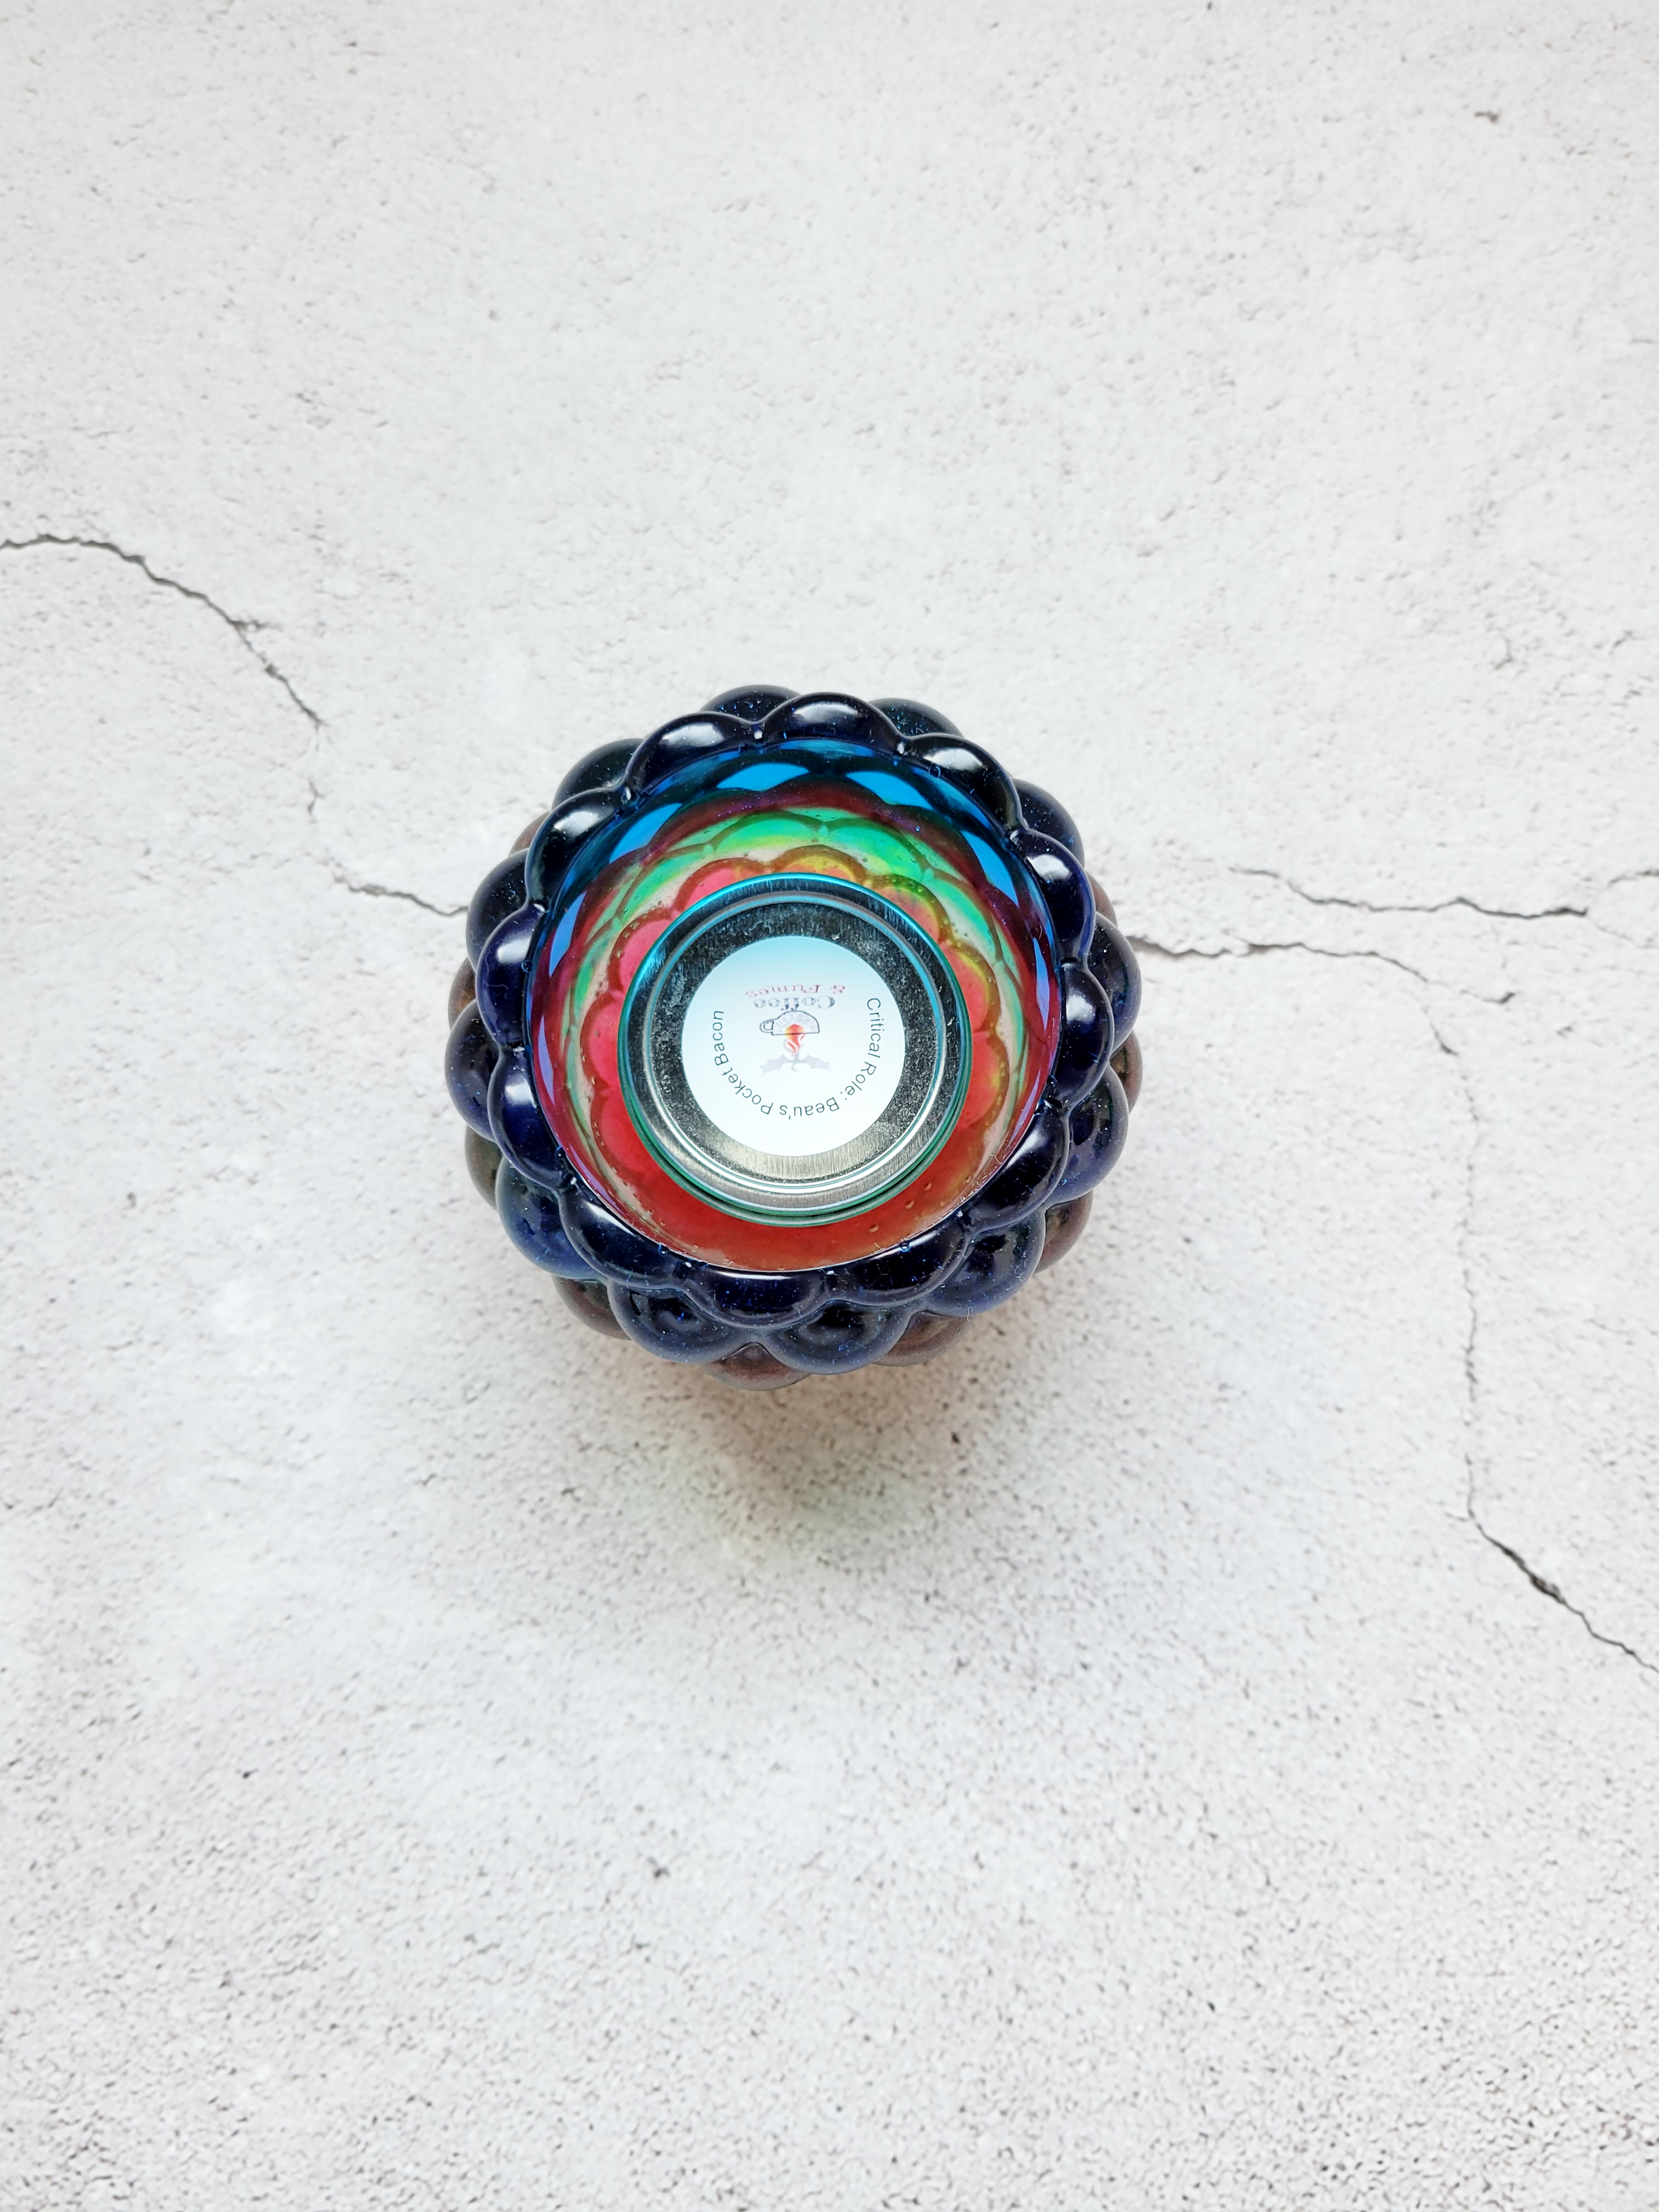 A top view of a tealight candle holder with a bubbled look. It's layered with colors of blue, red, green, orange. There is a tealight candle inside to show size comparison.